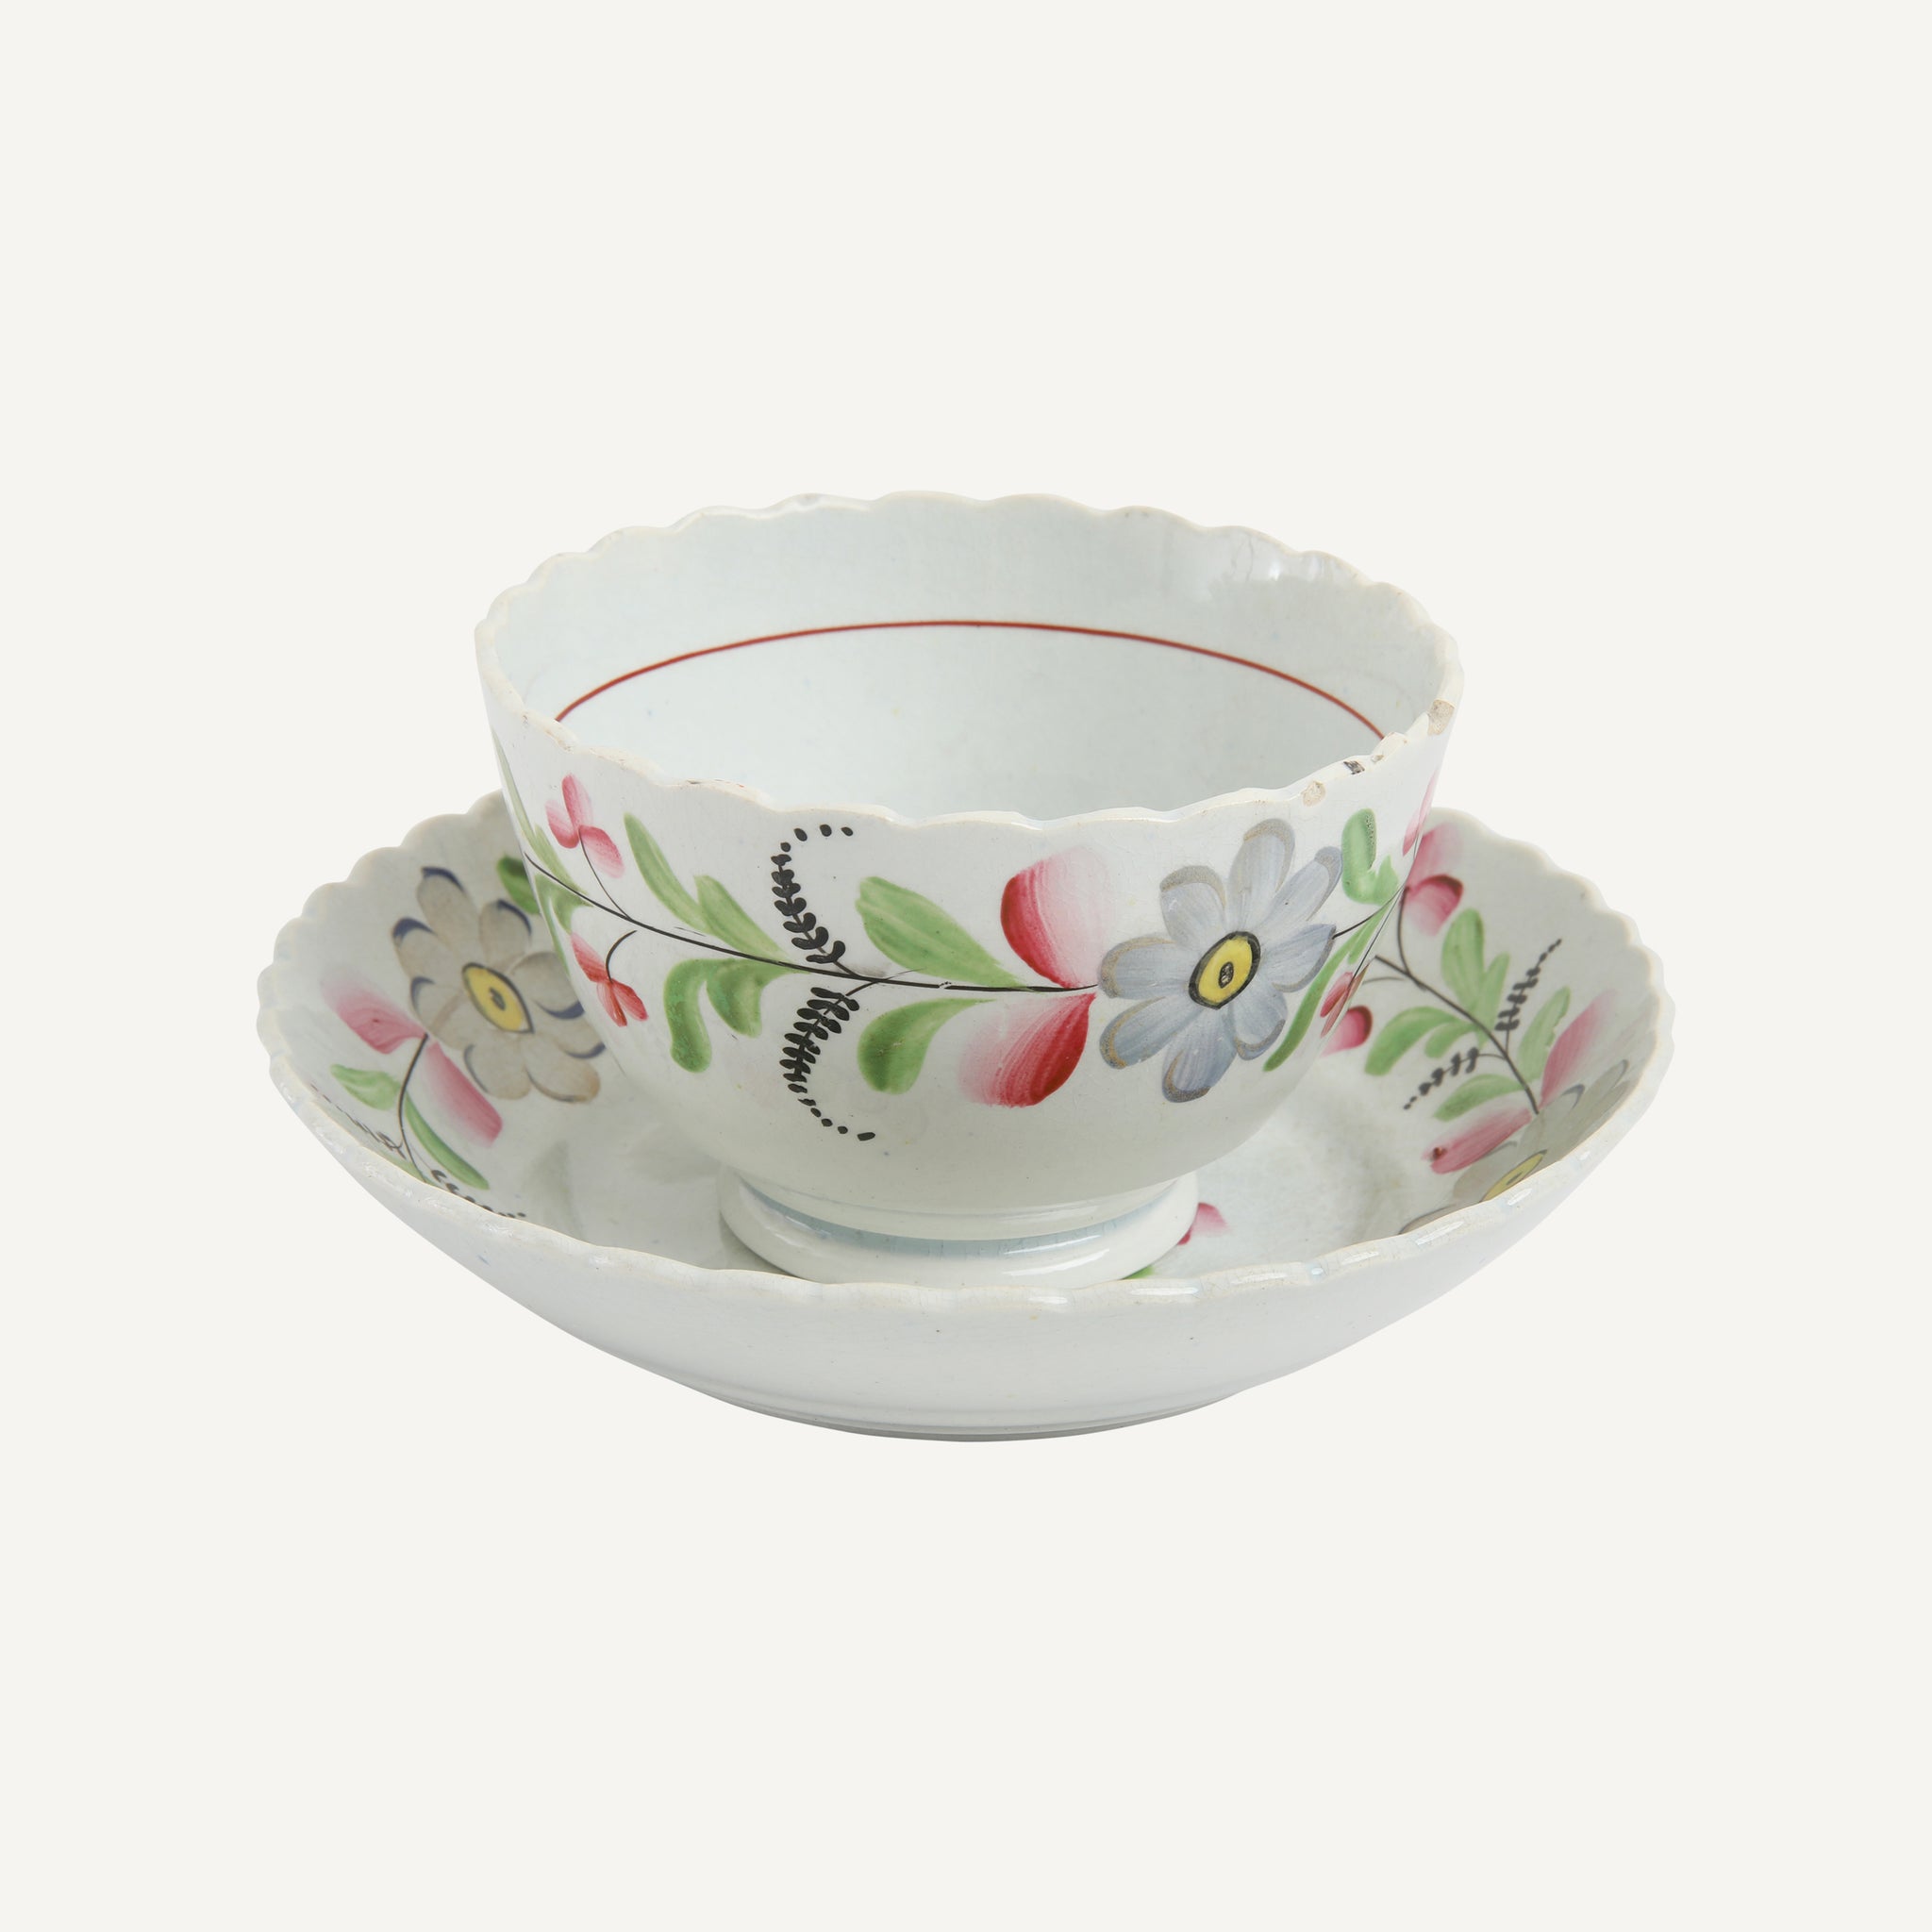 ANTIQUE TEA CUP AND SAUCER